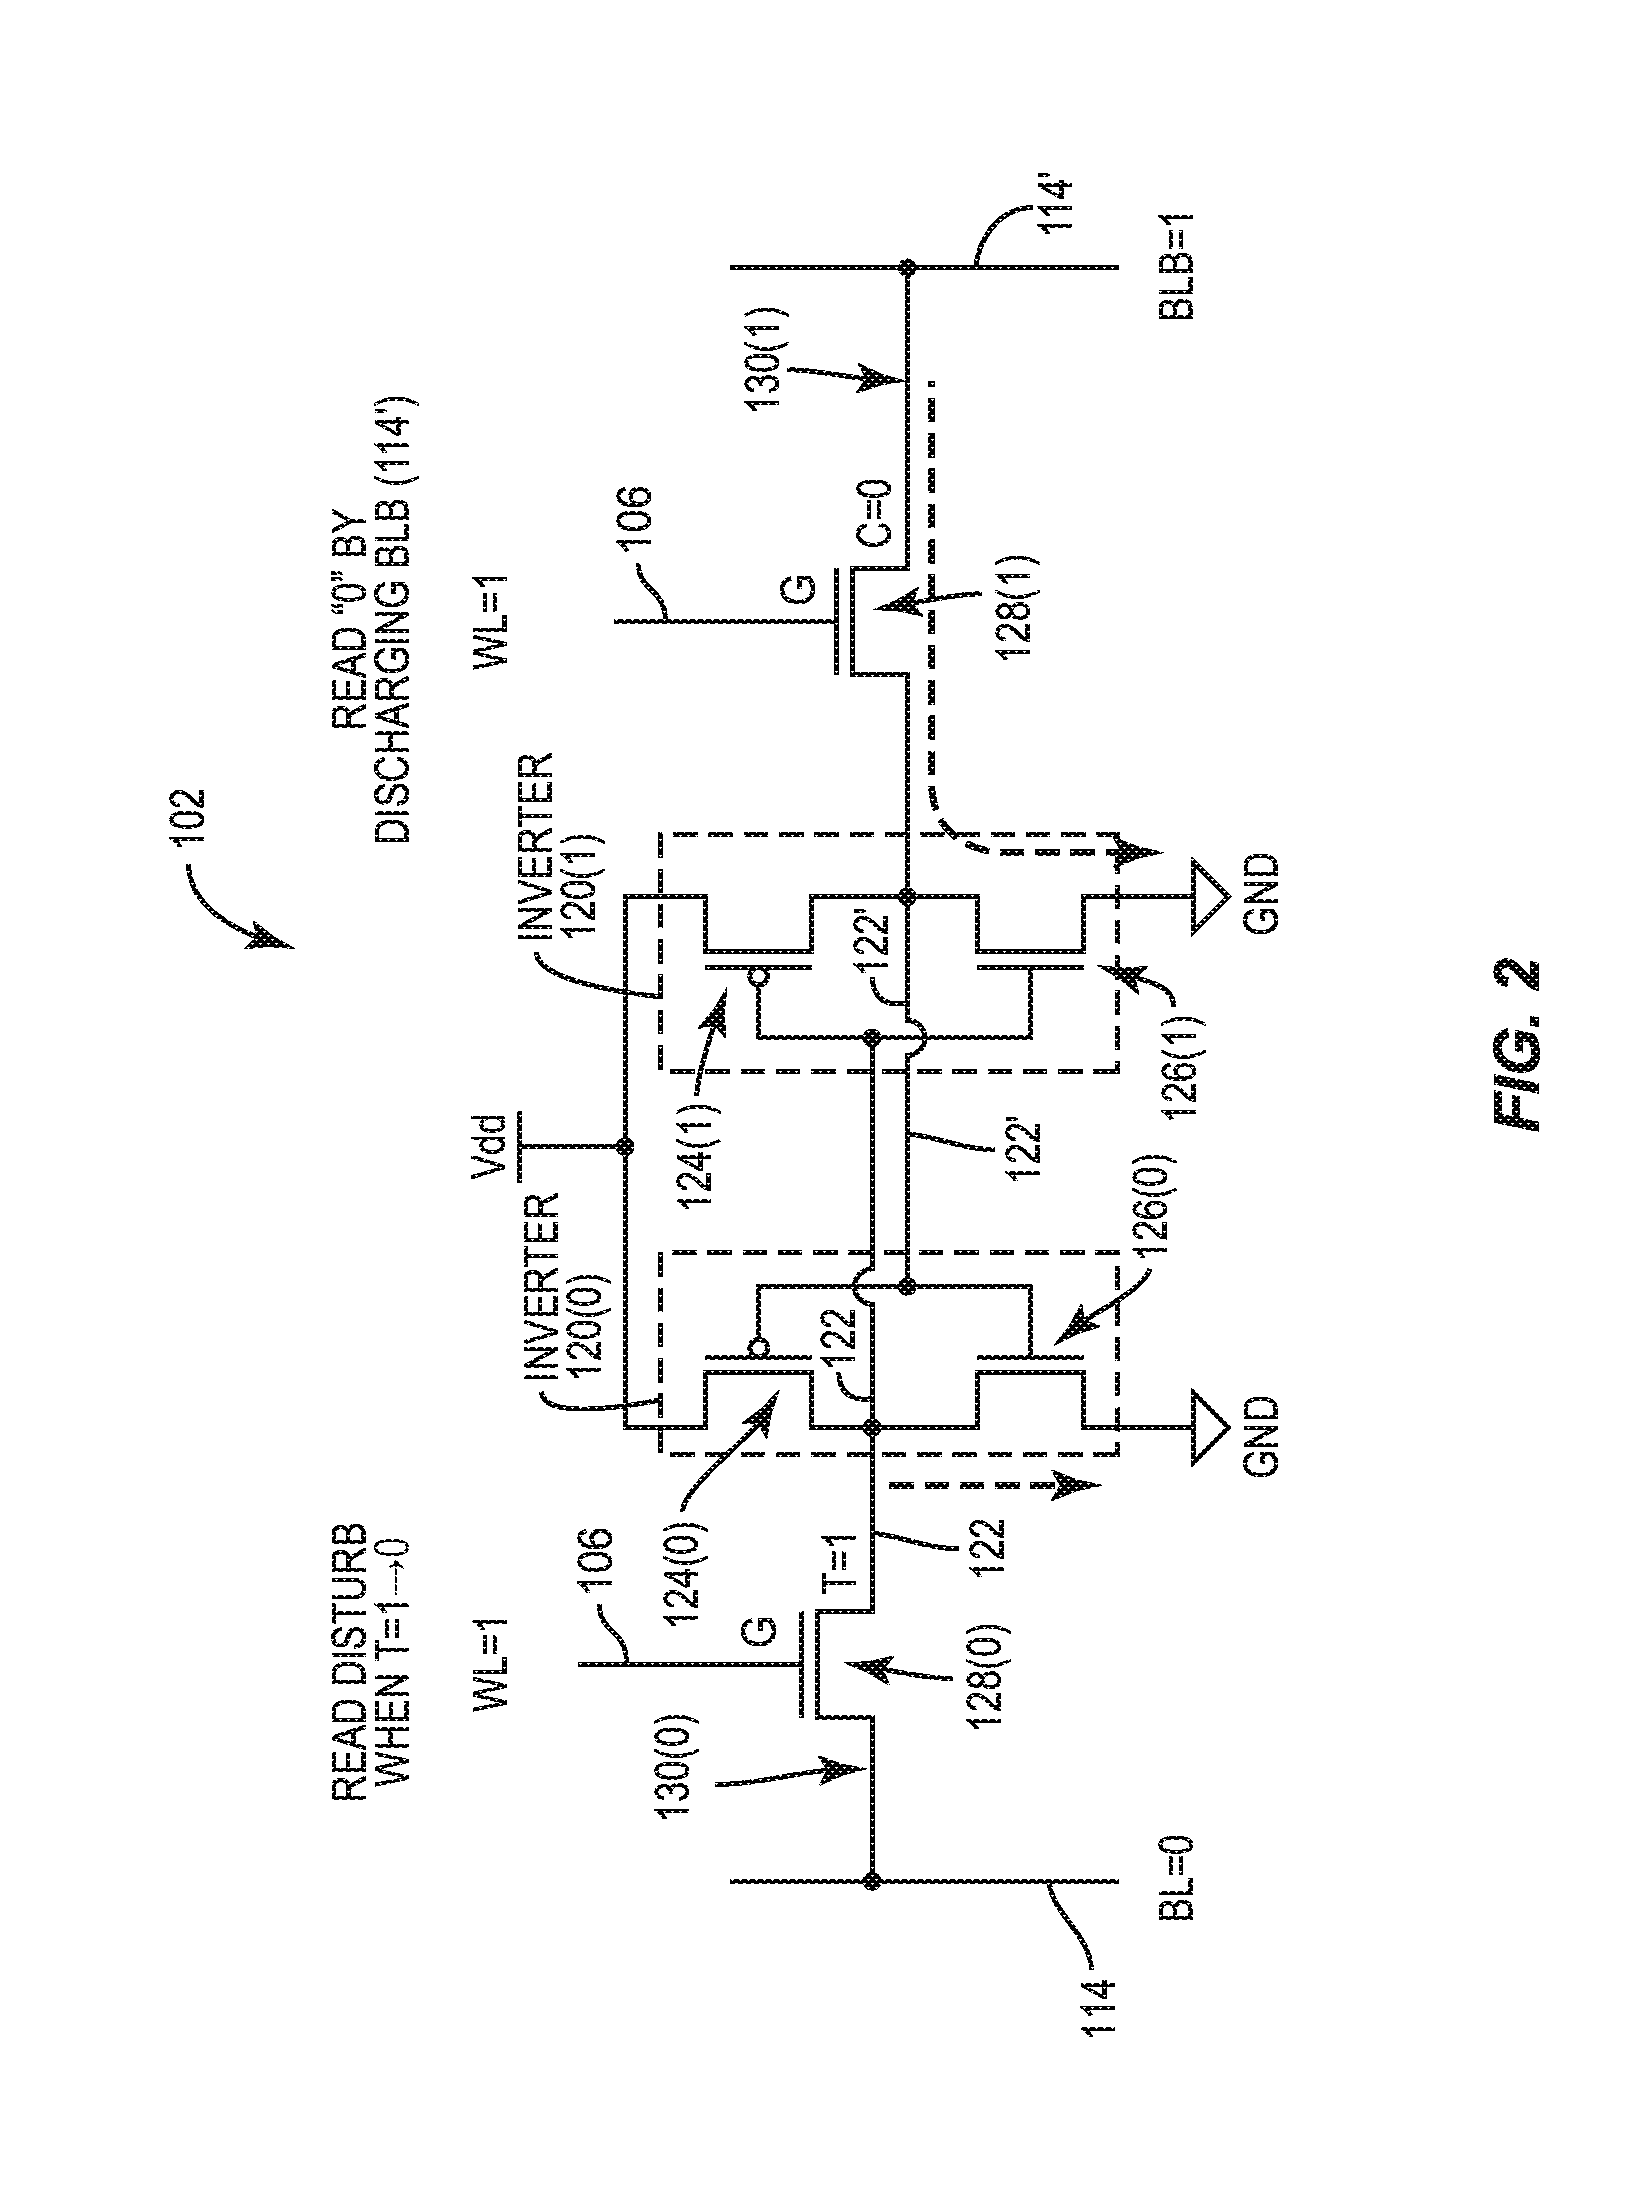 Wordline negative boost write-assist circuits for memory bit cells employing a p-type field-effect transistor (PFET) write port(s), and related systems and methods